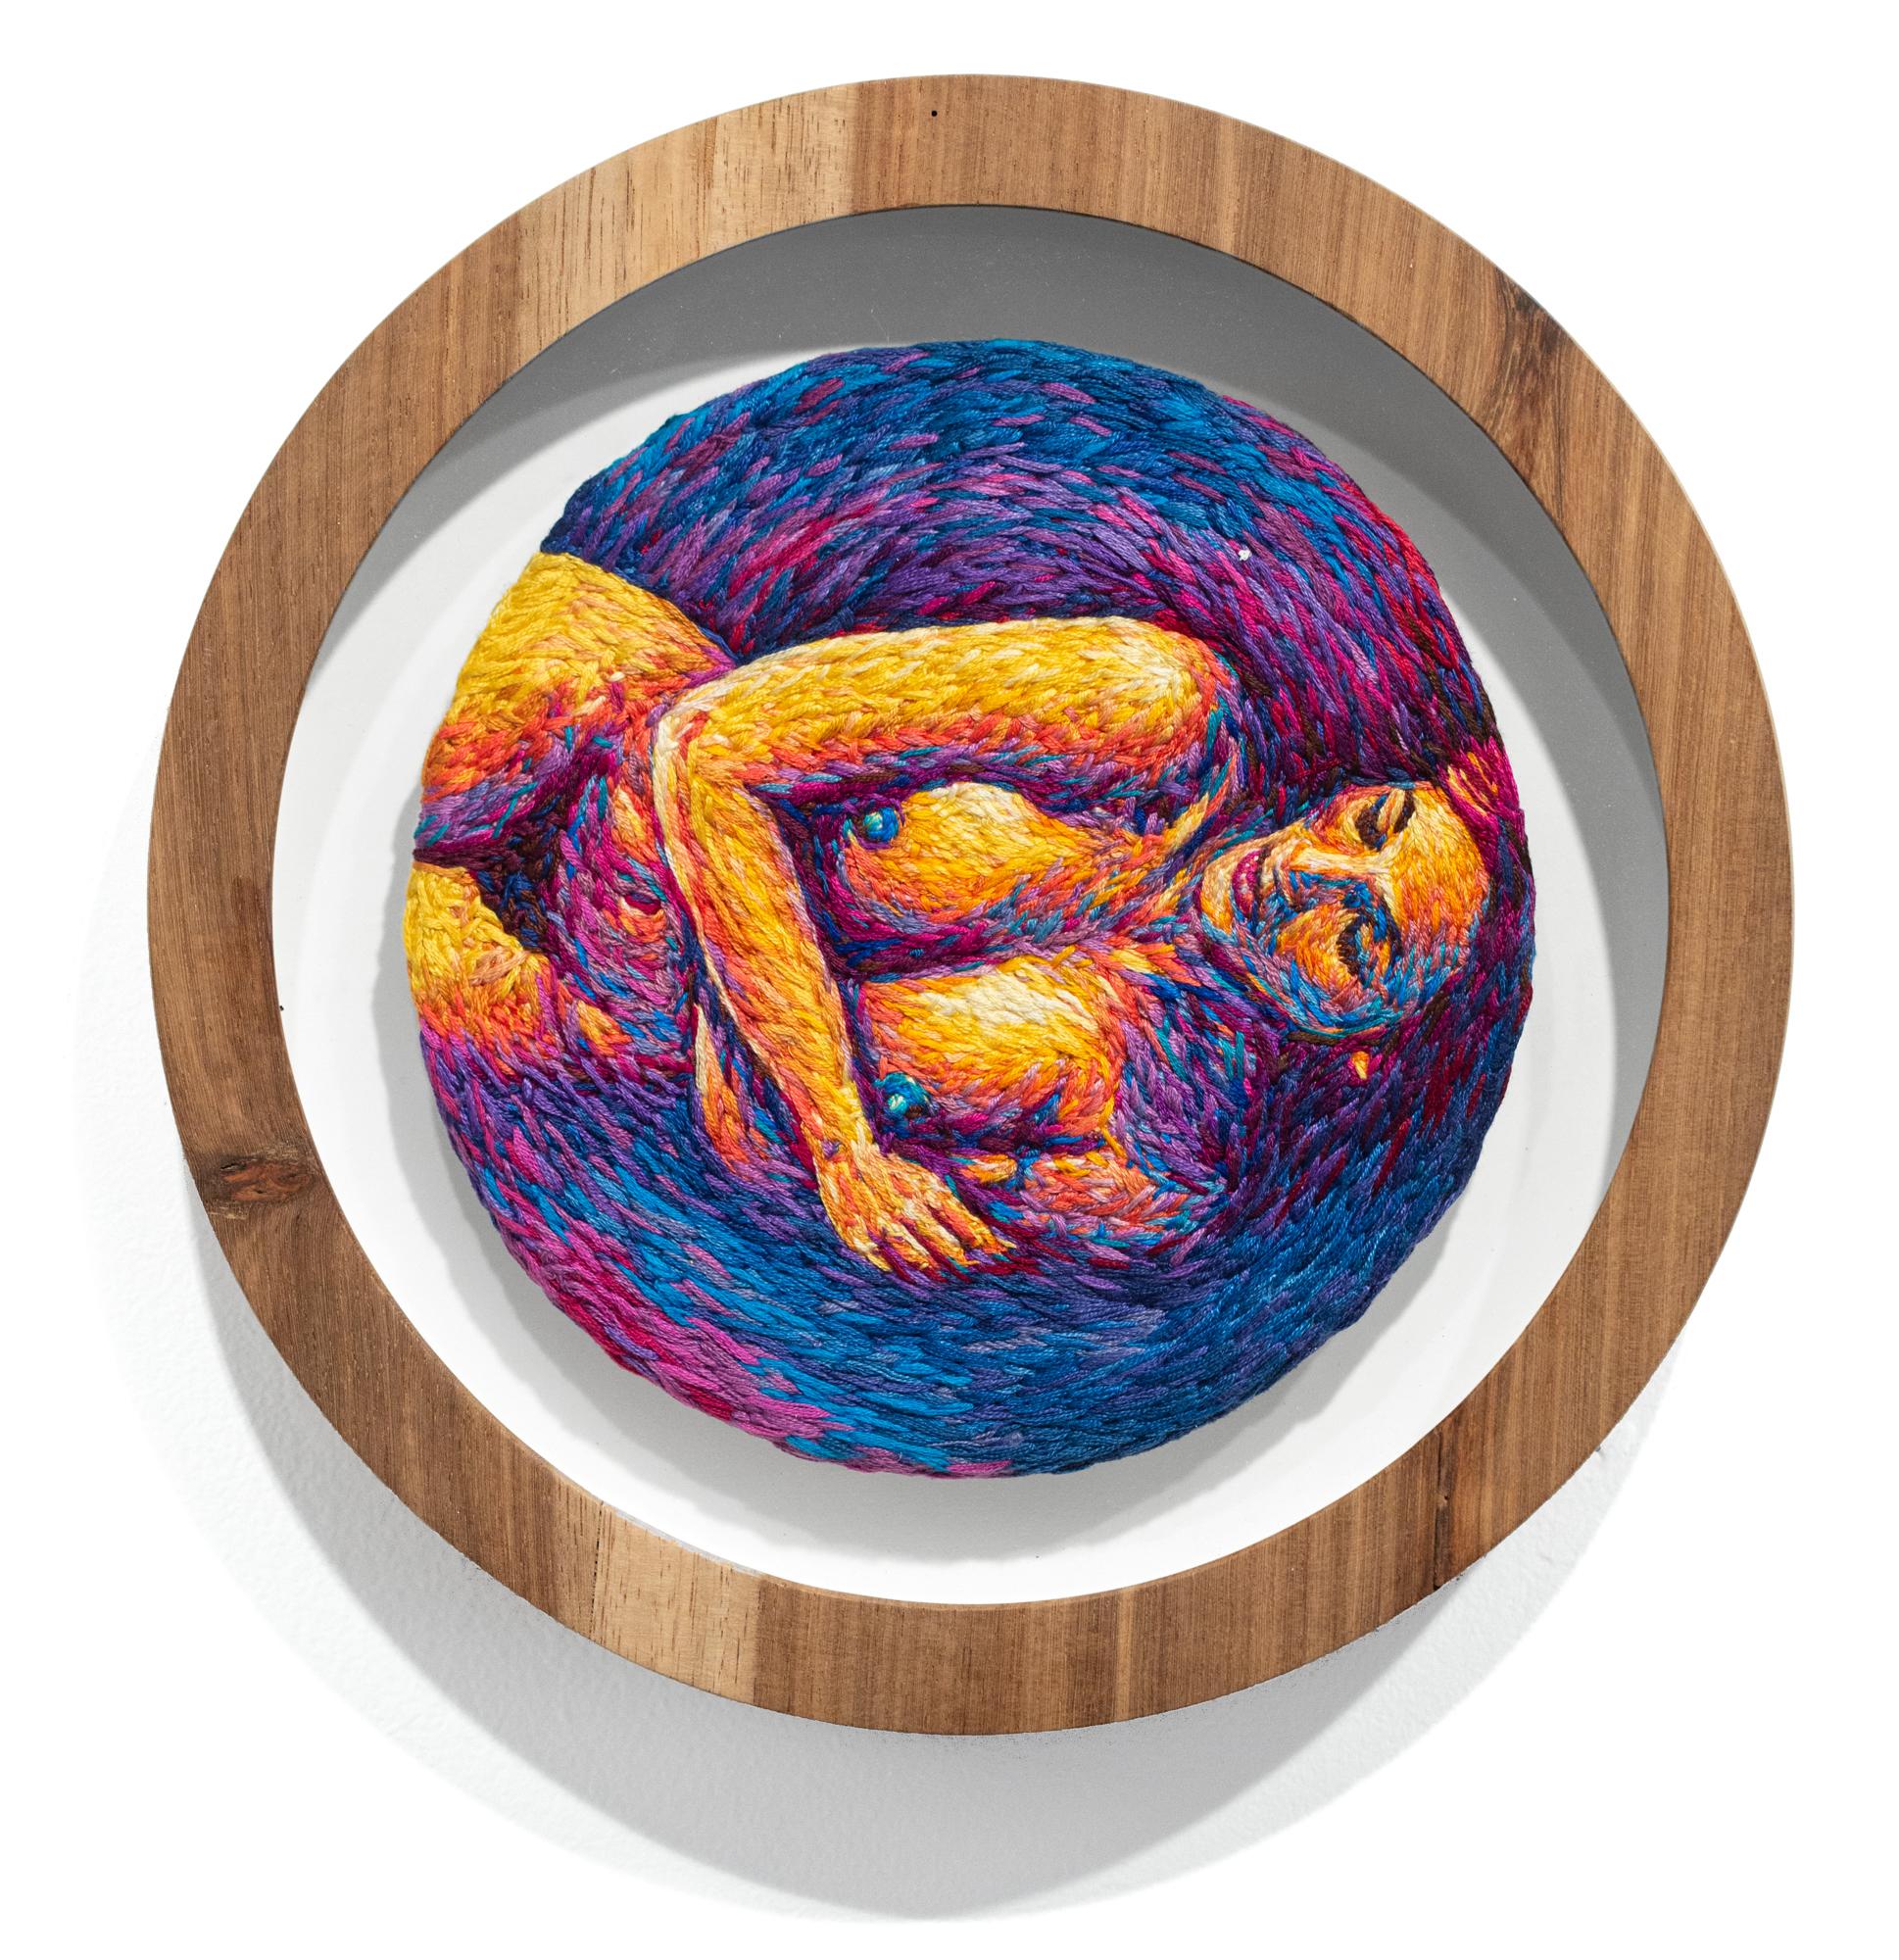 Referenced from an Australian 1983 Playboy, this is Faith Shaunessy embroidered by Danielle Clough in her signature, colorful style.  This piece is custom-framed in a classic, wood, round frame measuring 10 inches in diameter.

